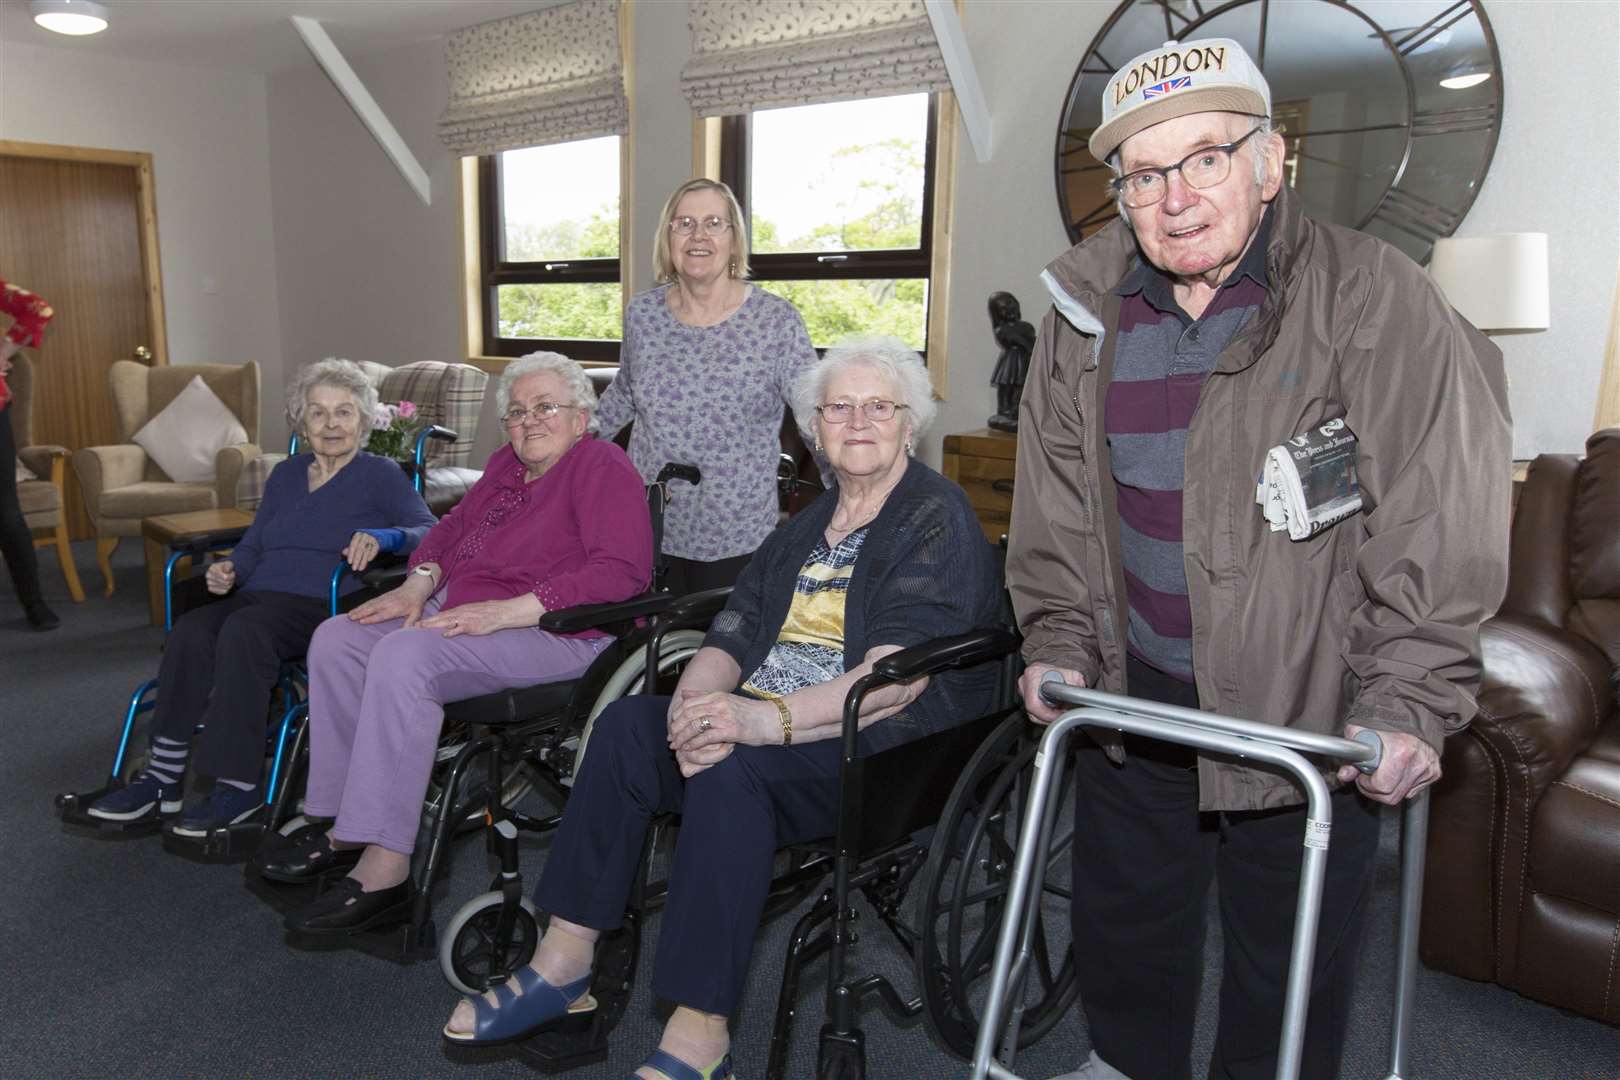 Some of those who attend the Laurandy Centre – (from left) Nancy Mackay, Barbara Robertson, Mary Inkster, Marion Swanson and Alistair Taylor. Picture: Robert MacDonald / Northern Studios